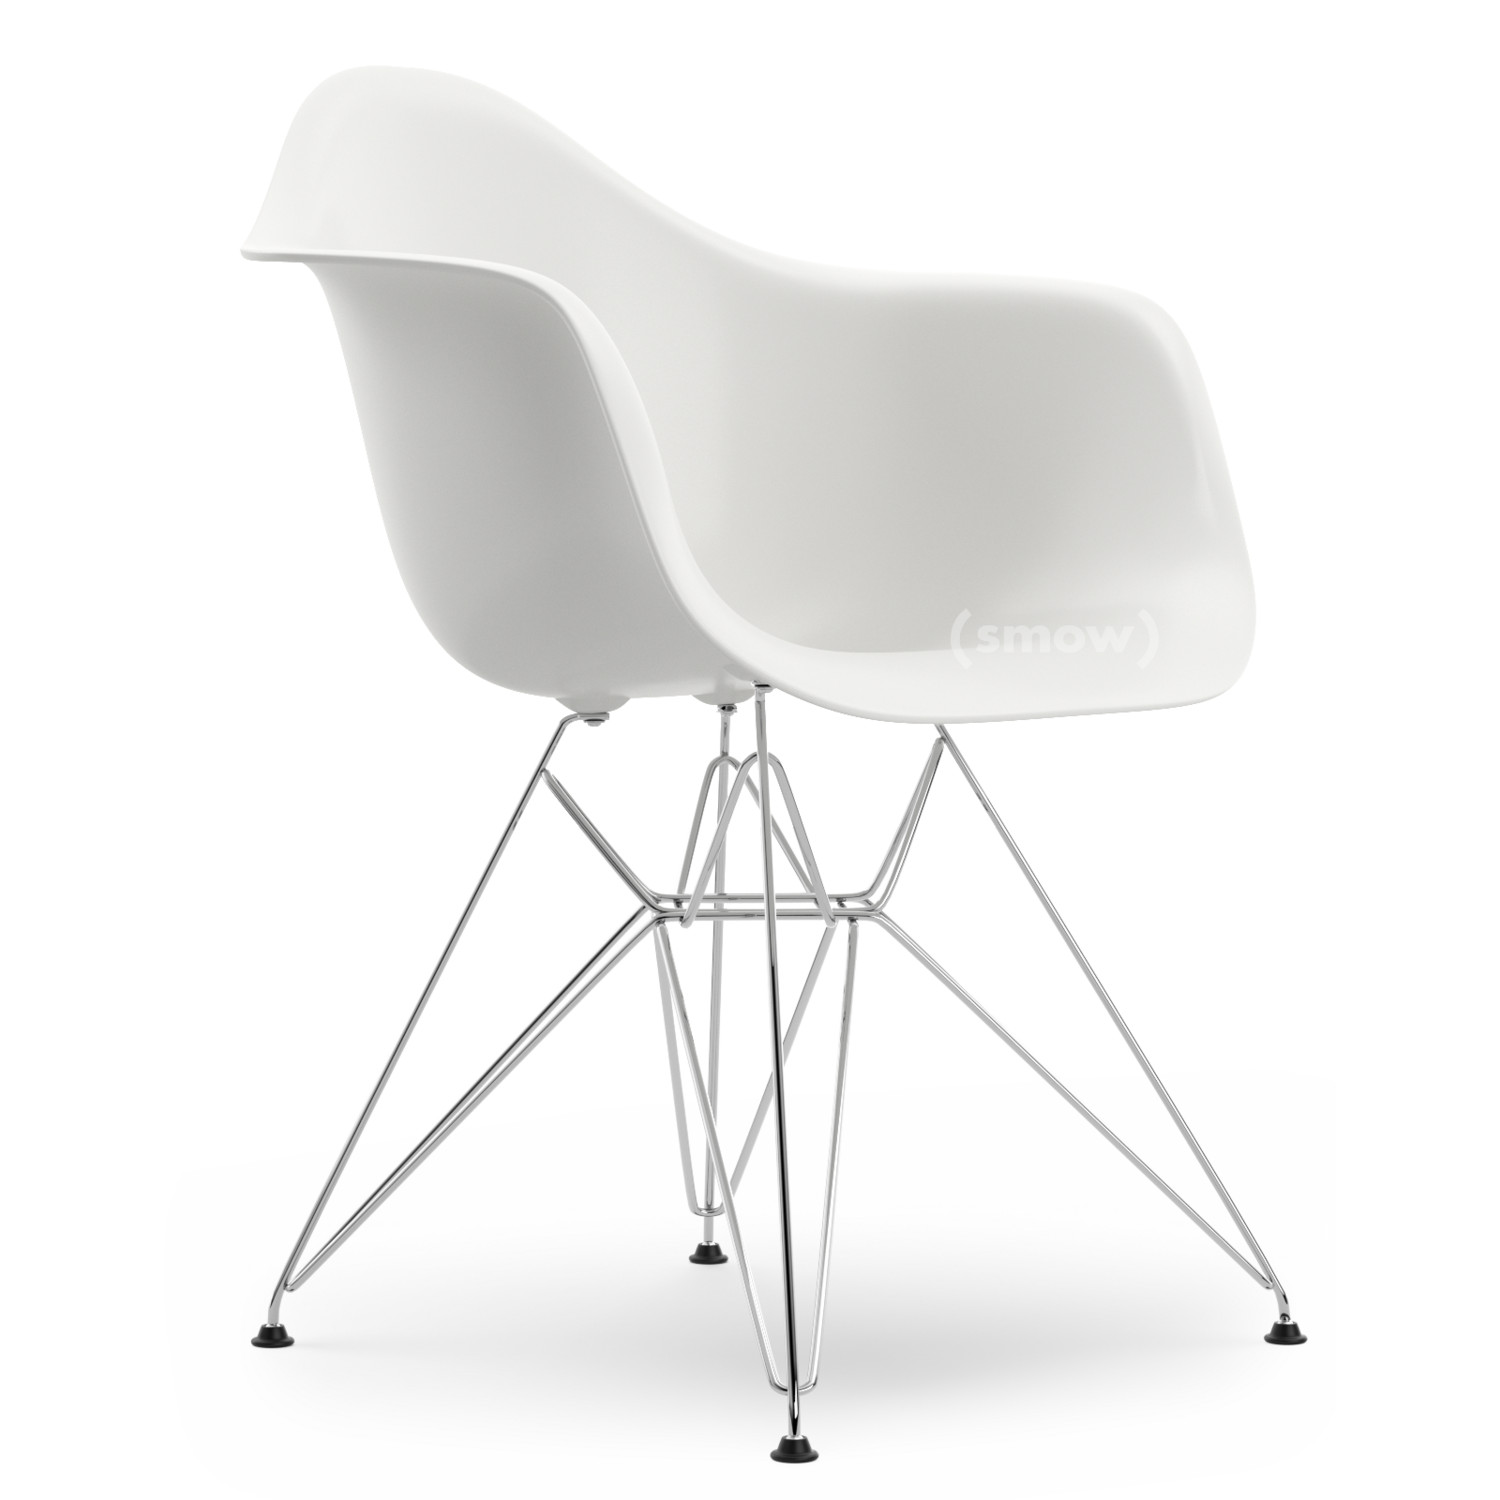 kern Monument pindas Vitra Eames Plastic Armchair DAR by Charles & Ray Eames, 1950 - Designer  furniture by smow.com